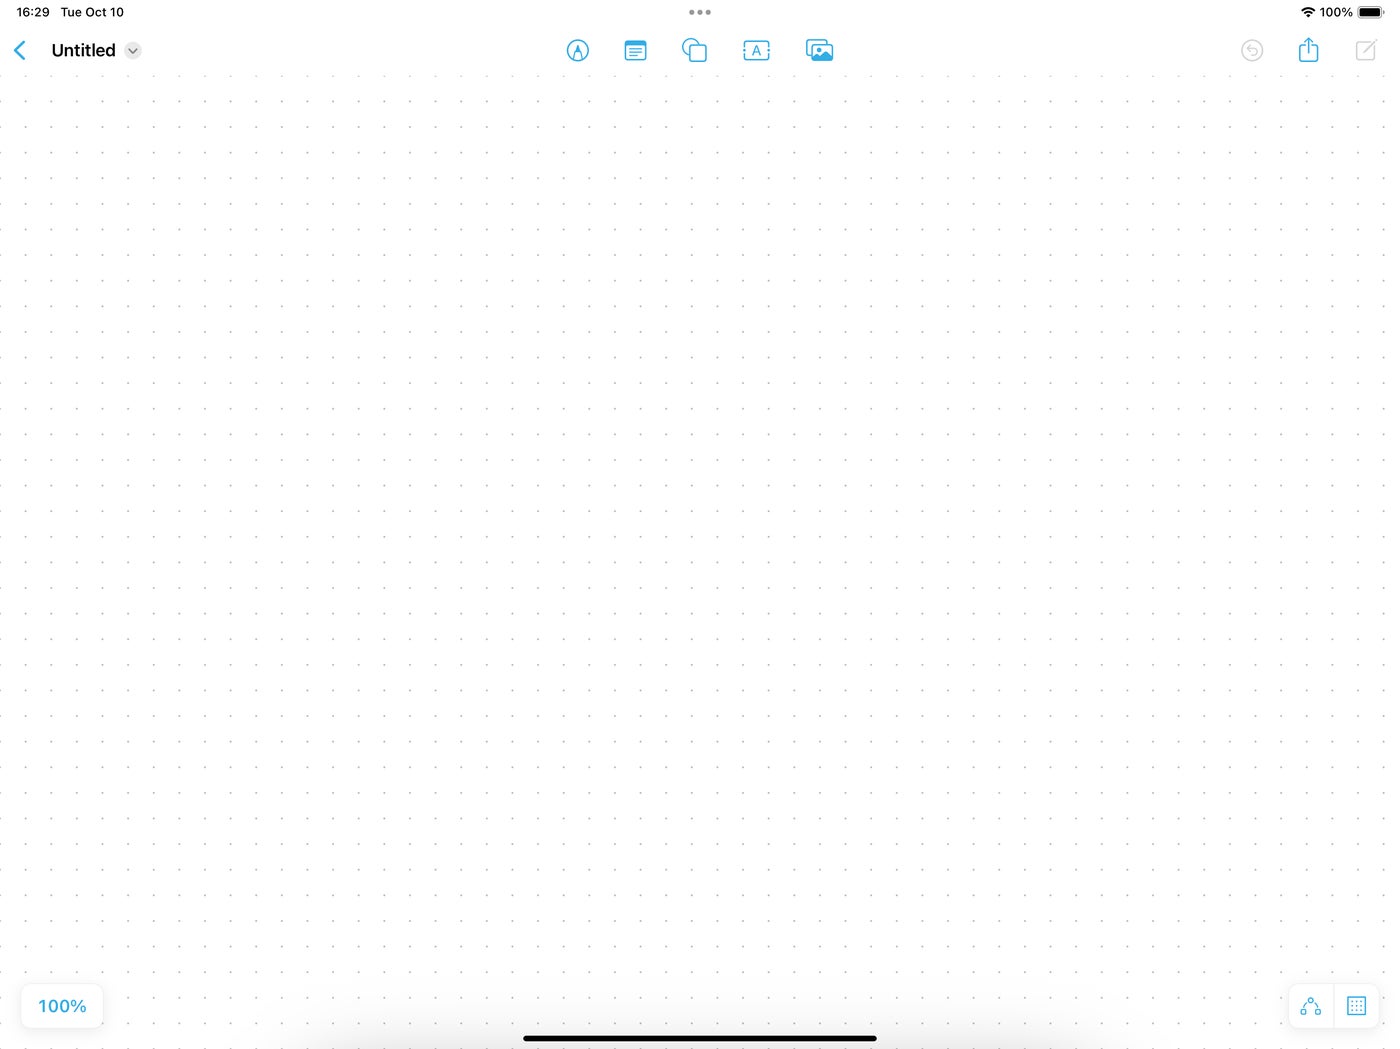 Screenshot showing the interface of a new, blank Freeform board on iPad.